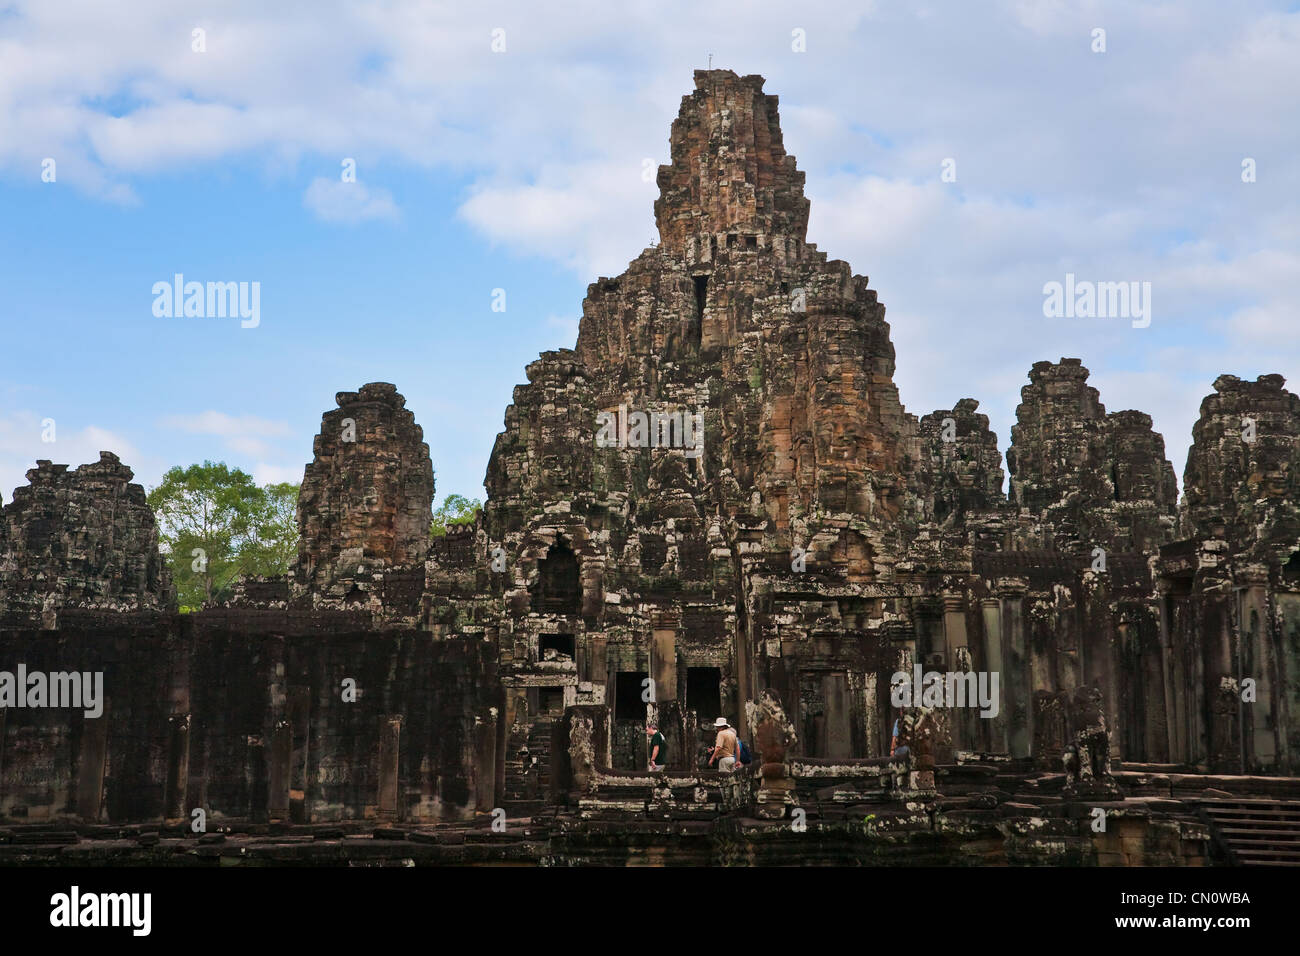 Statues at Bayon Temple, Angkor Thom, UNESCO World Heritage site, Cambodia Stock Photo